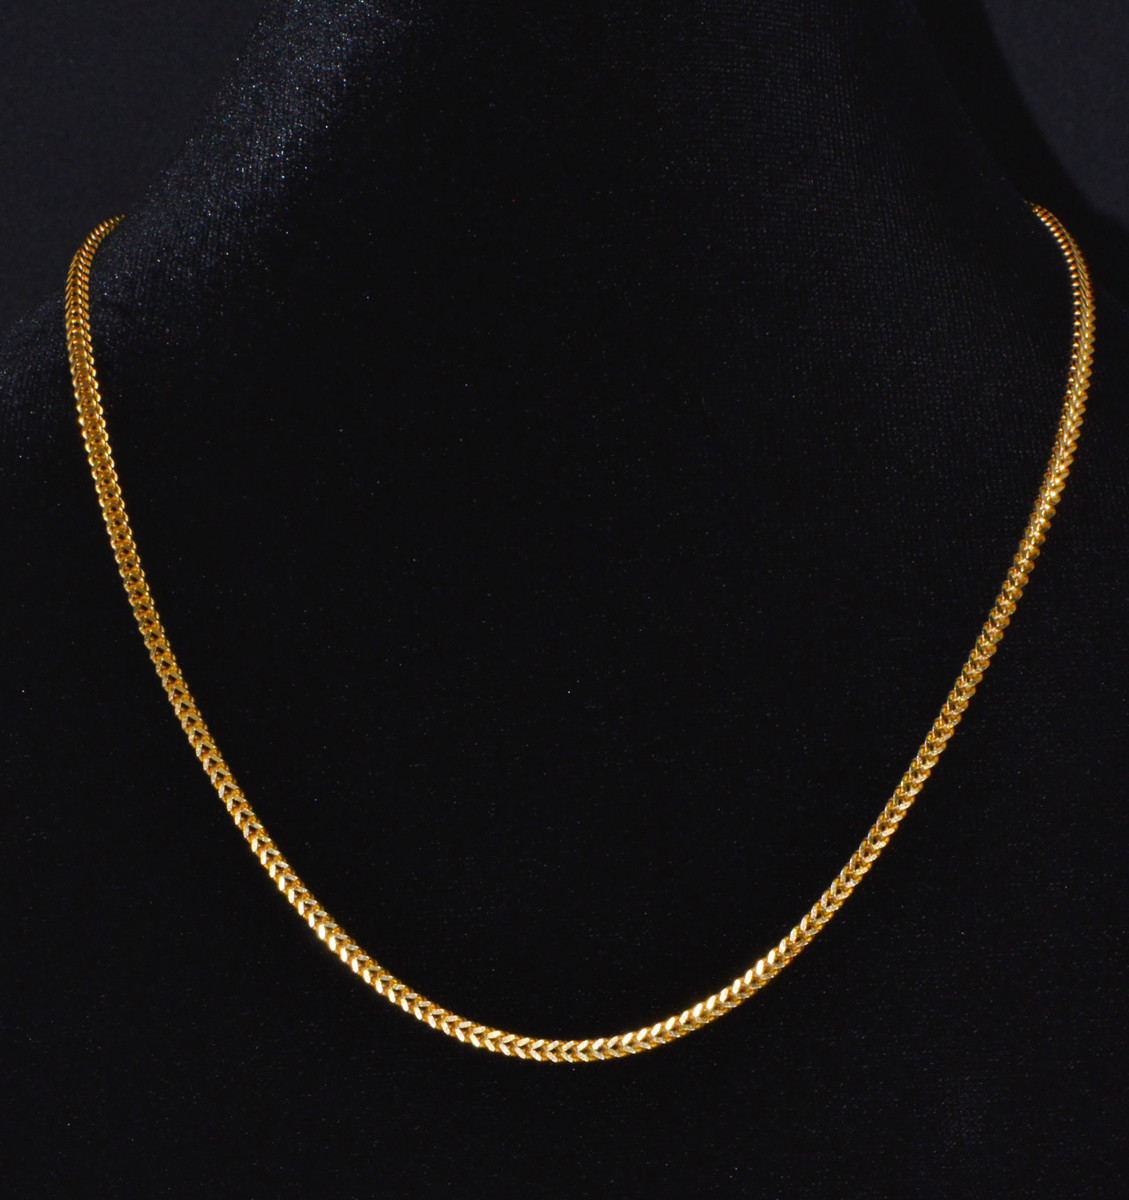 Gorgeous 22K Solid Gold Franco Chain Mens Womens Necklace 18" 21.8g